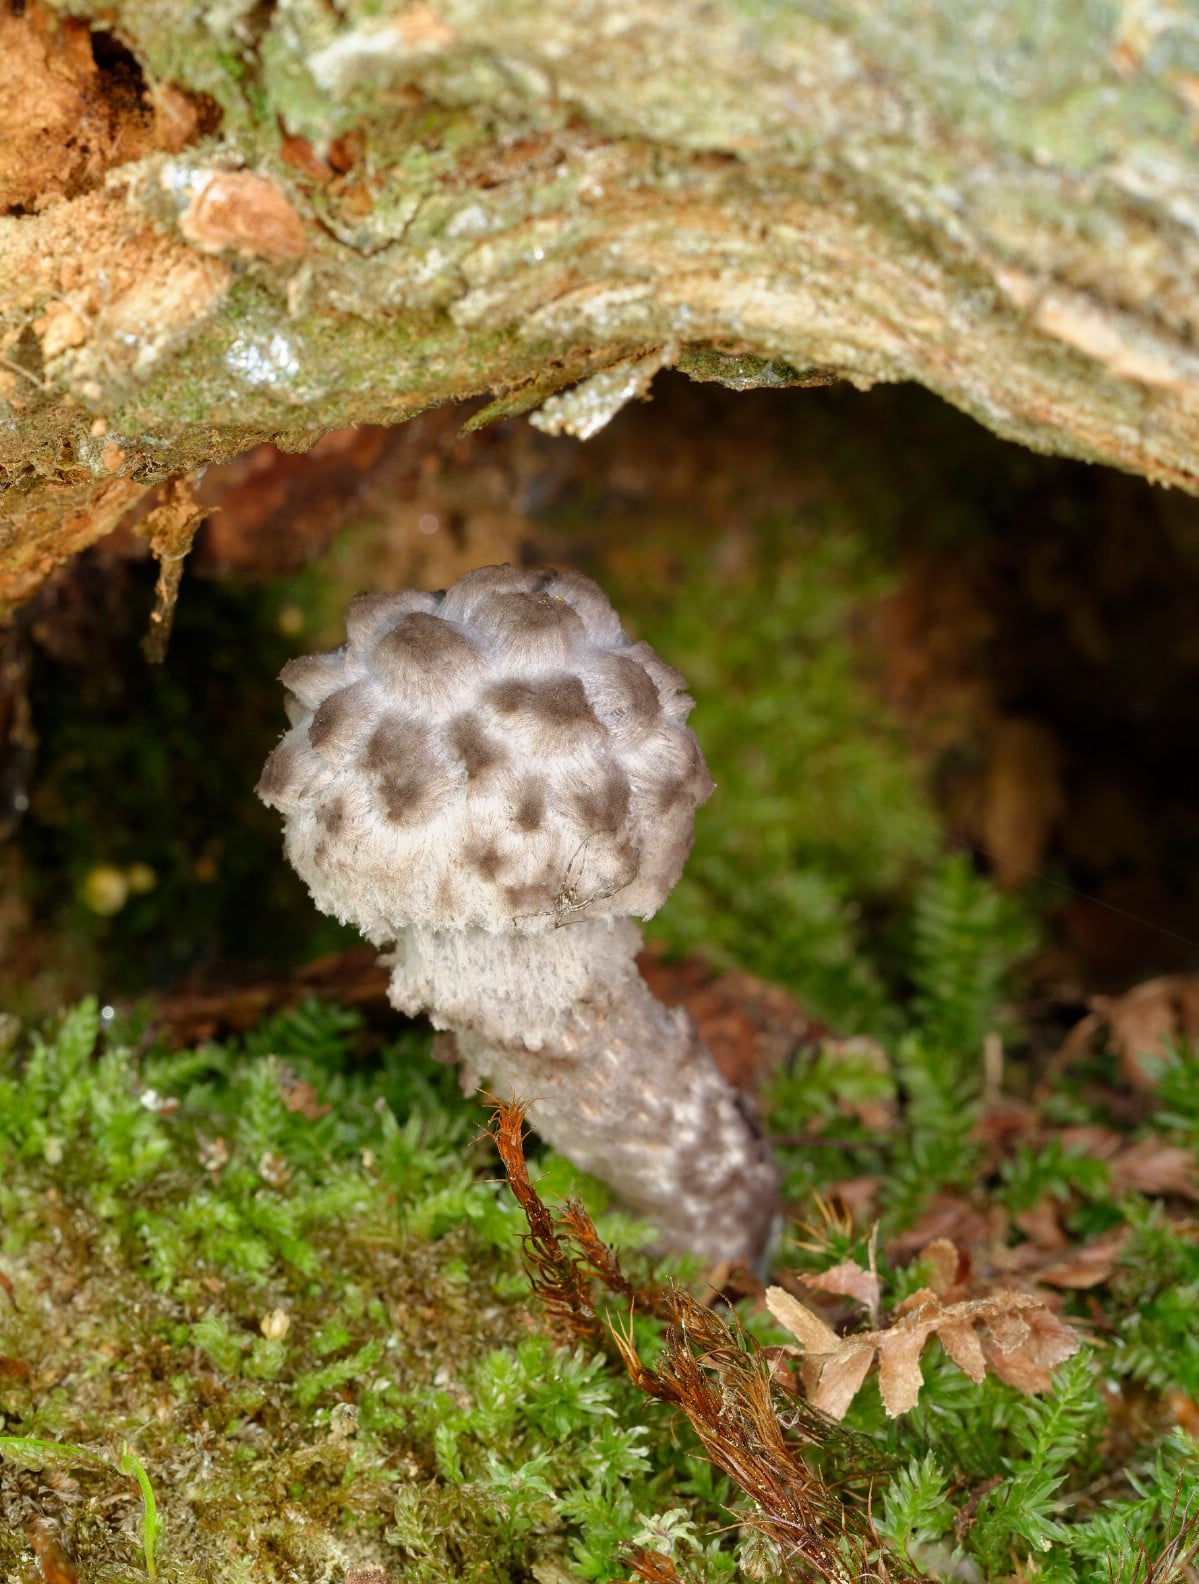 Small old man of the woods on mossy forest floor.